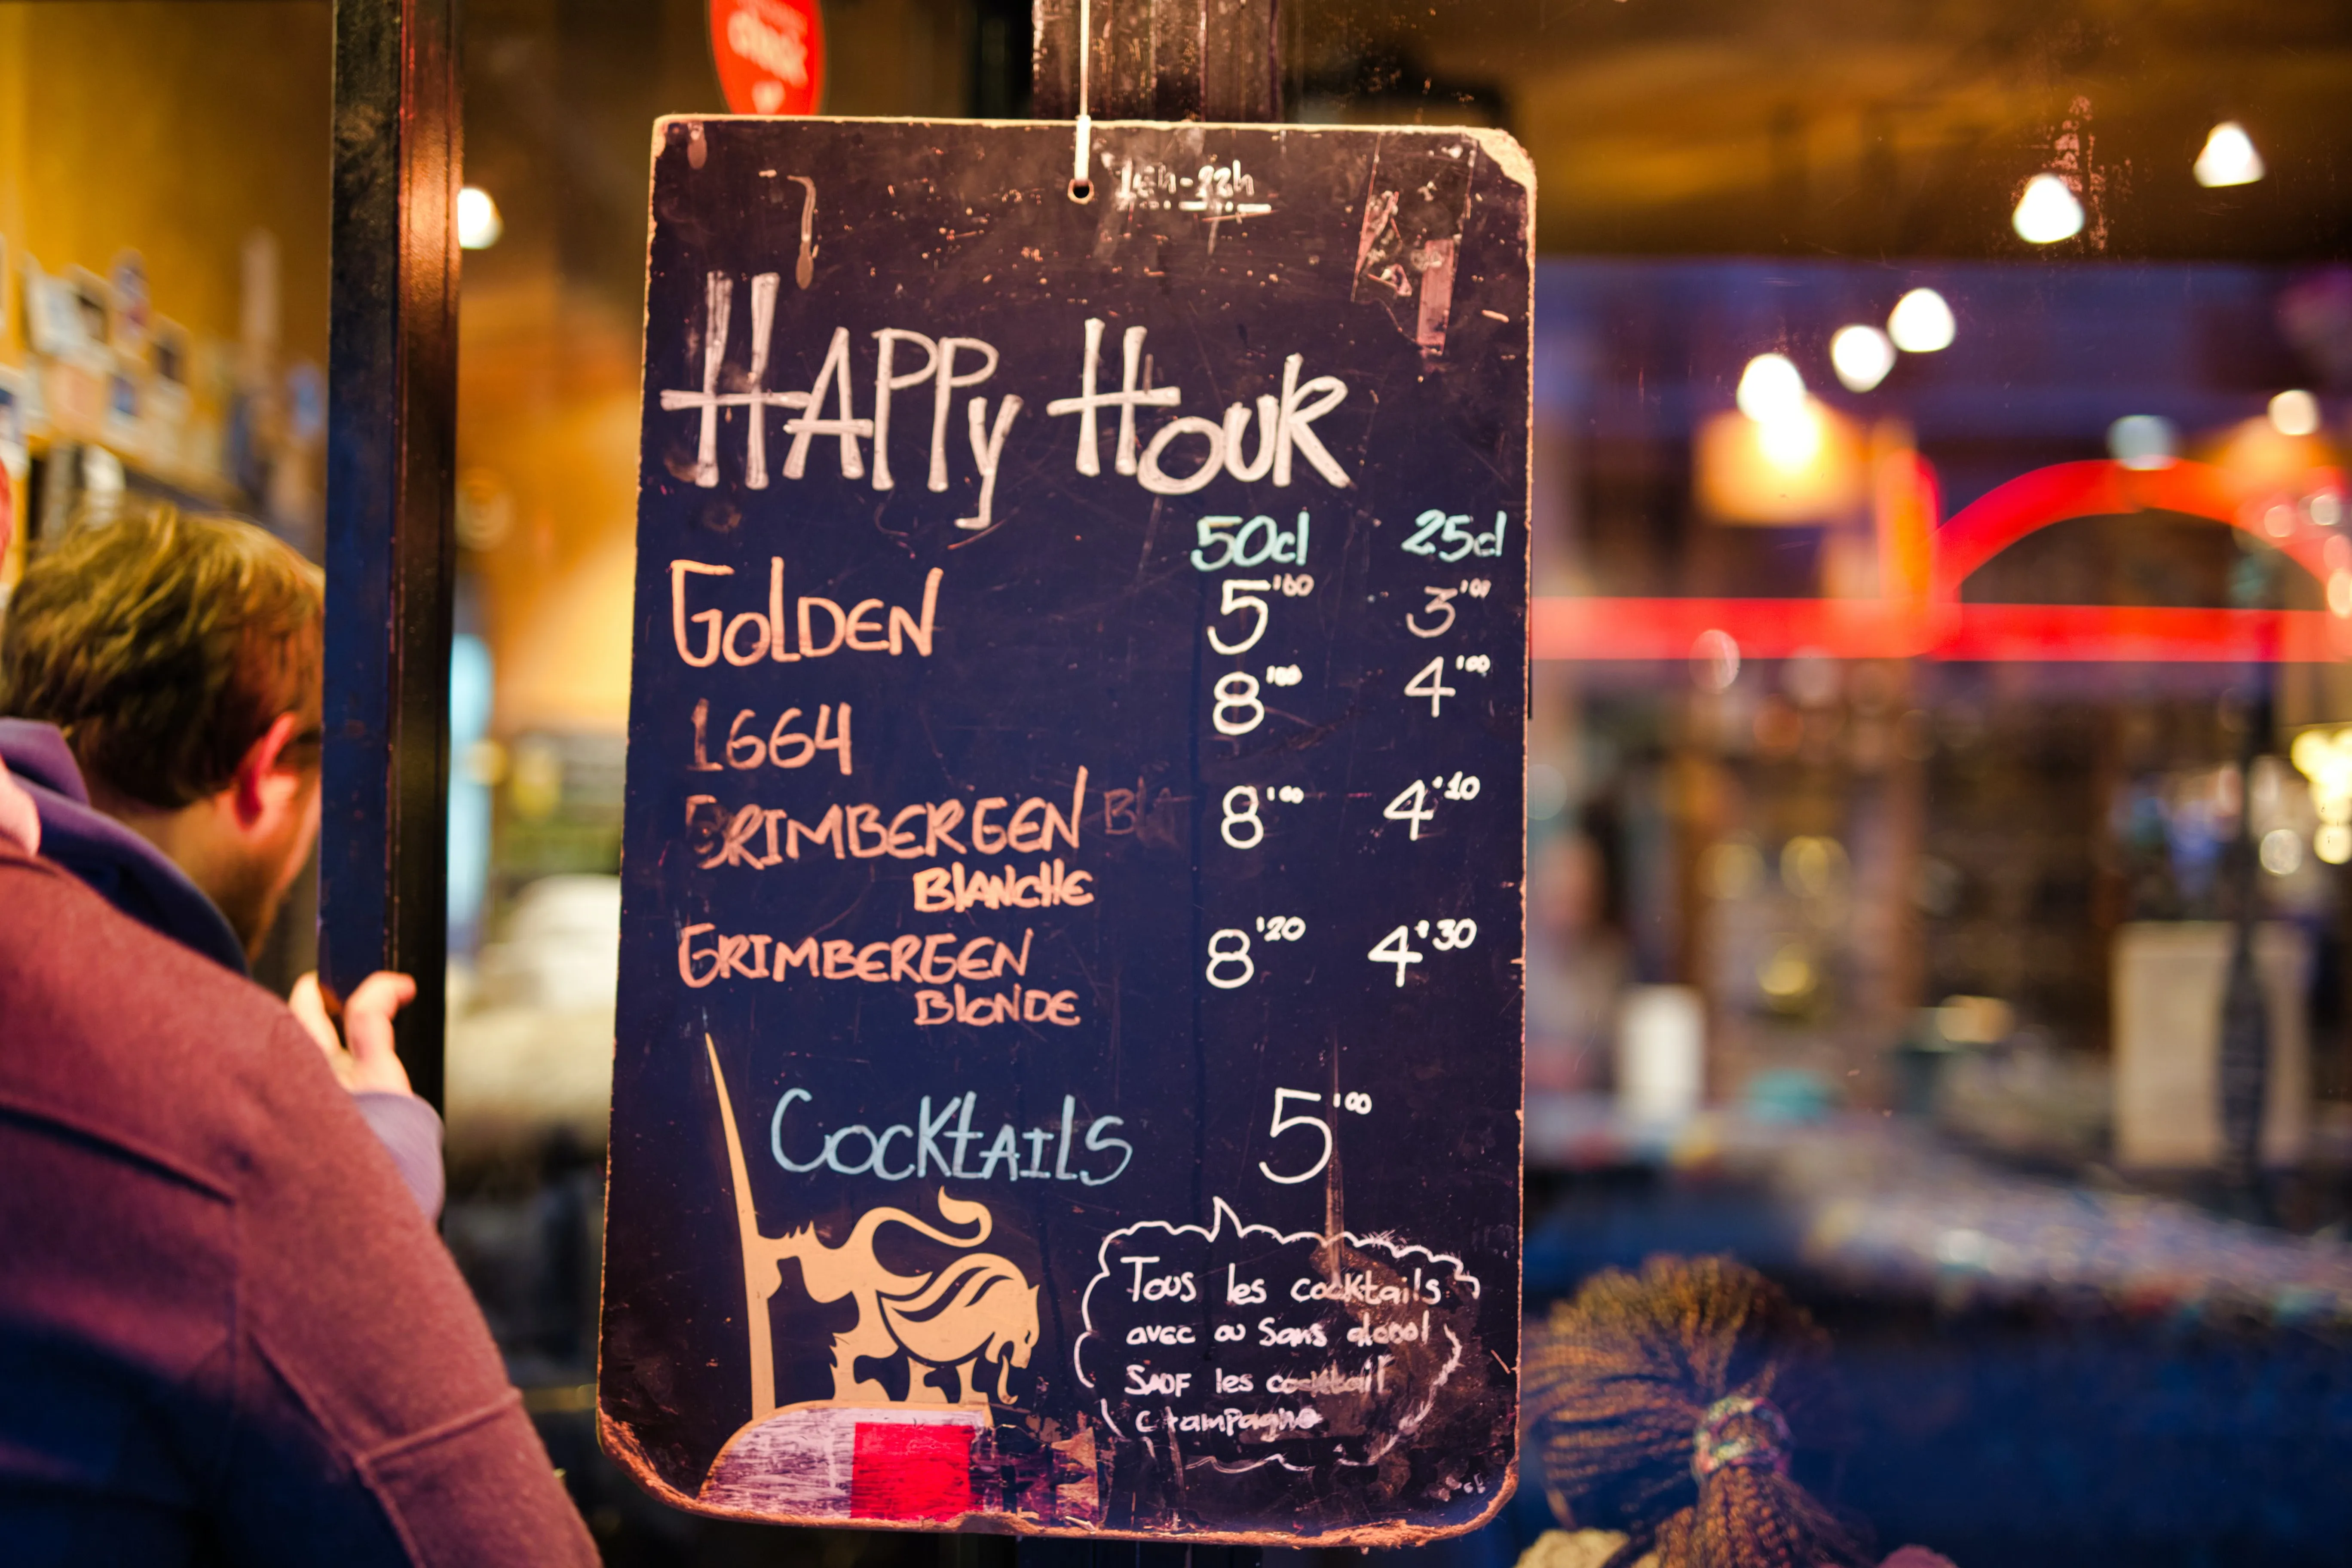 A photo of a Happy Hour sign